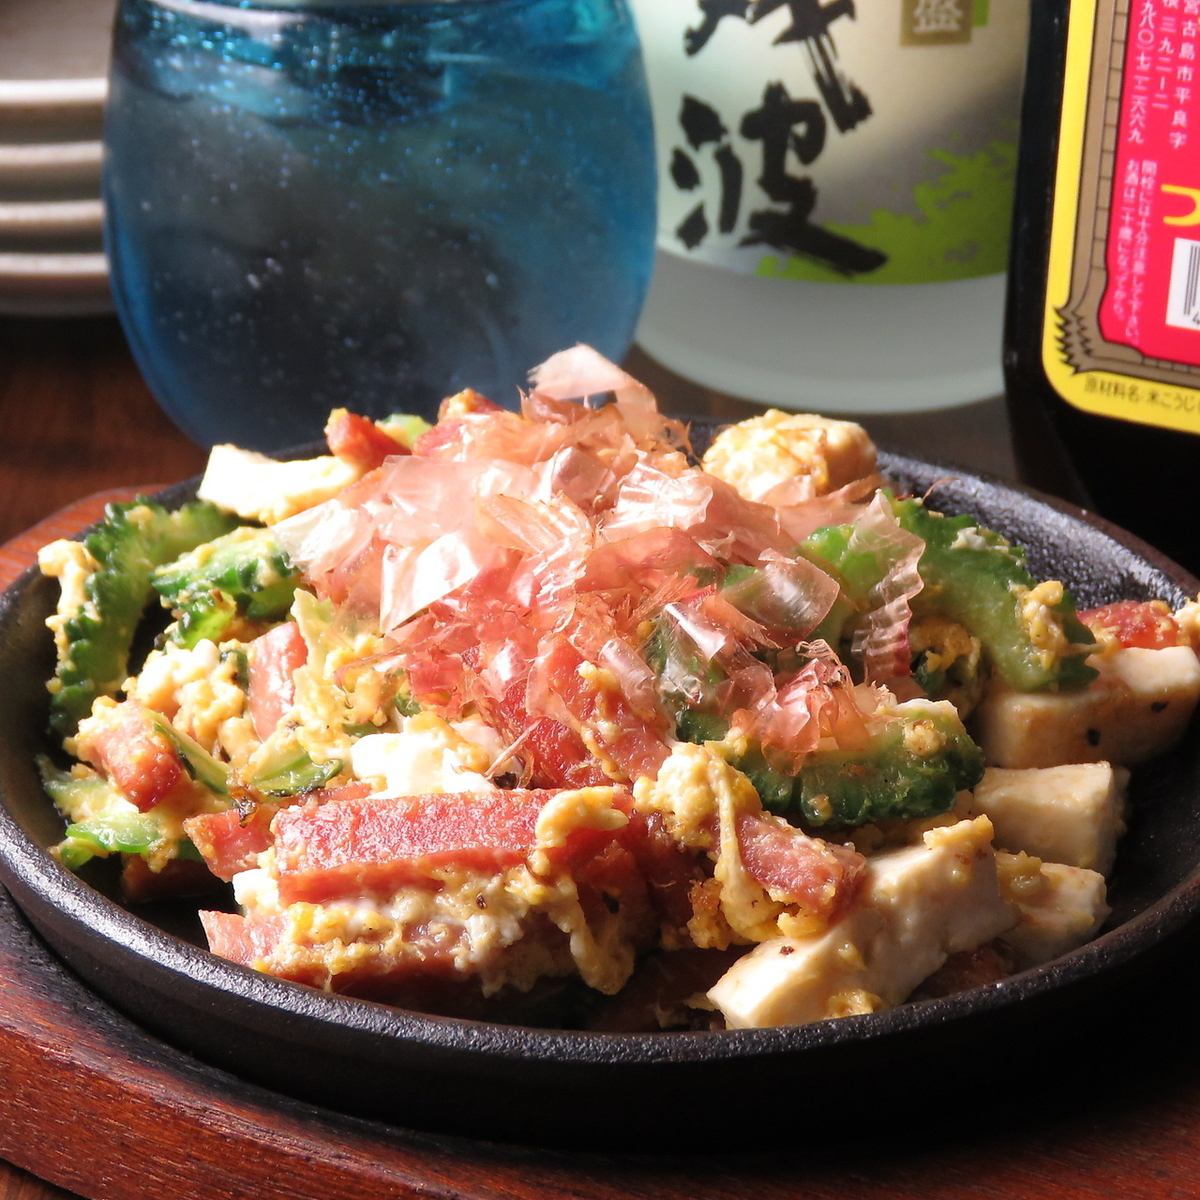 It is a shop where you can enjoy the soul food of the owner's hometown "Okinawa" and Awamori!